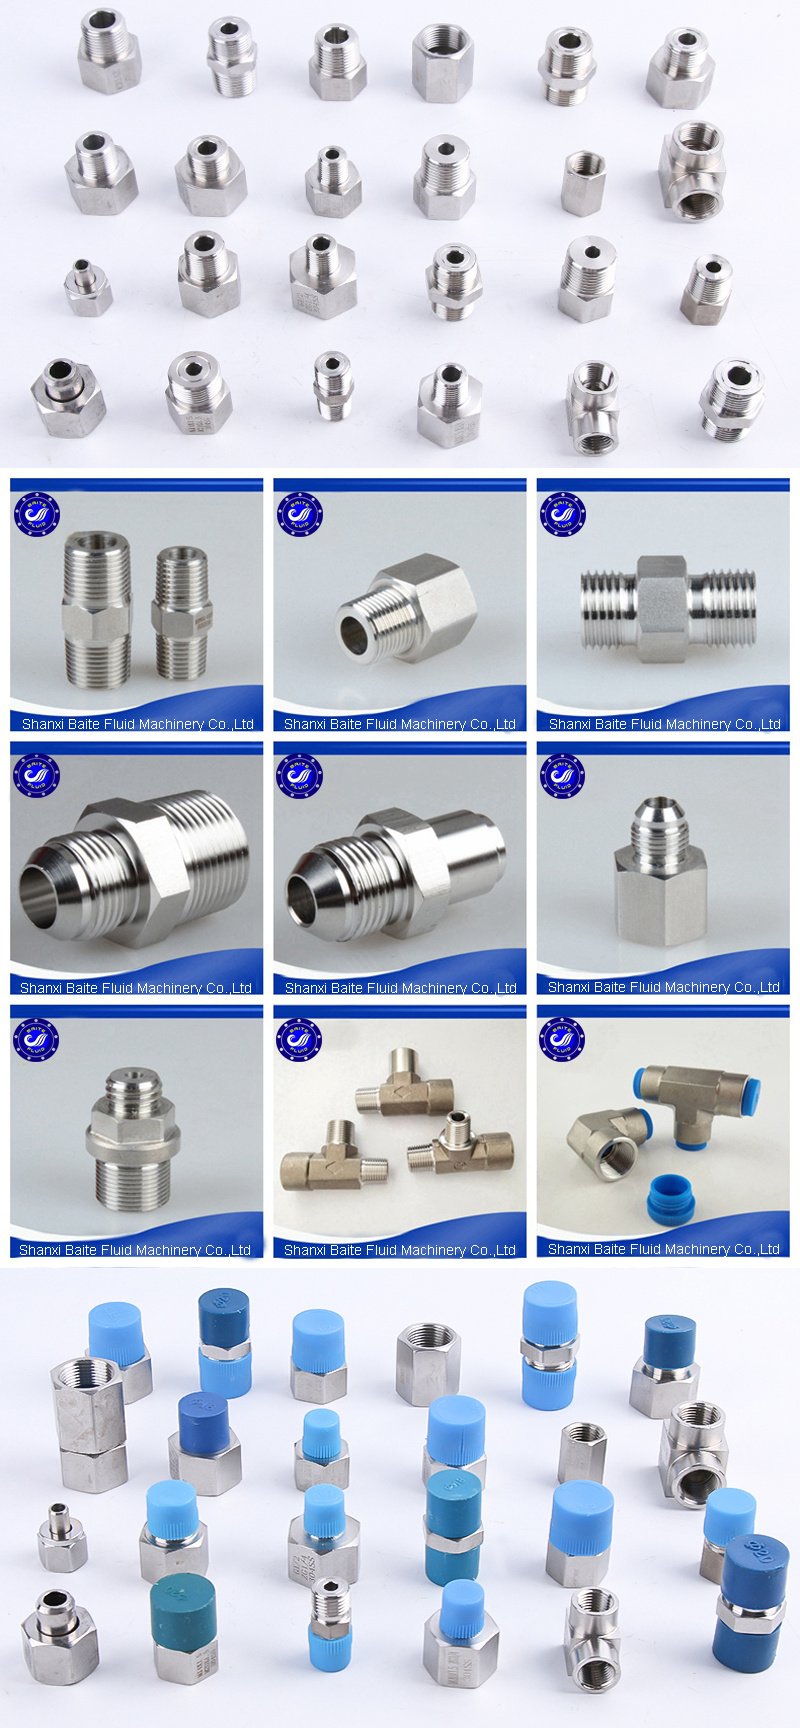 Straight Male Thread Hex Reducing Nipple Stainless Steel 316 Bsp to NPT Thread Adapters Fast Air Fittings